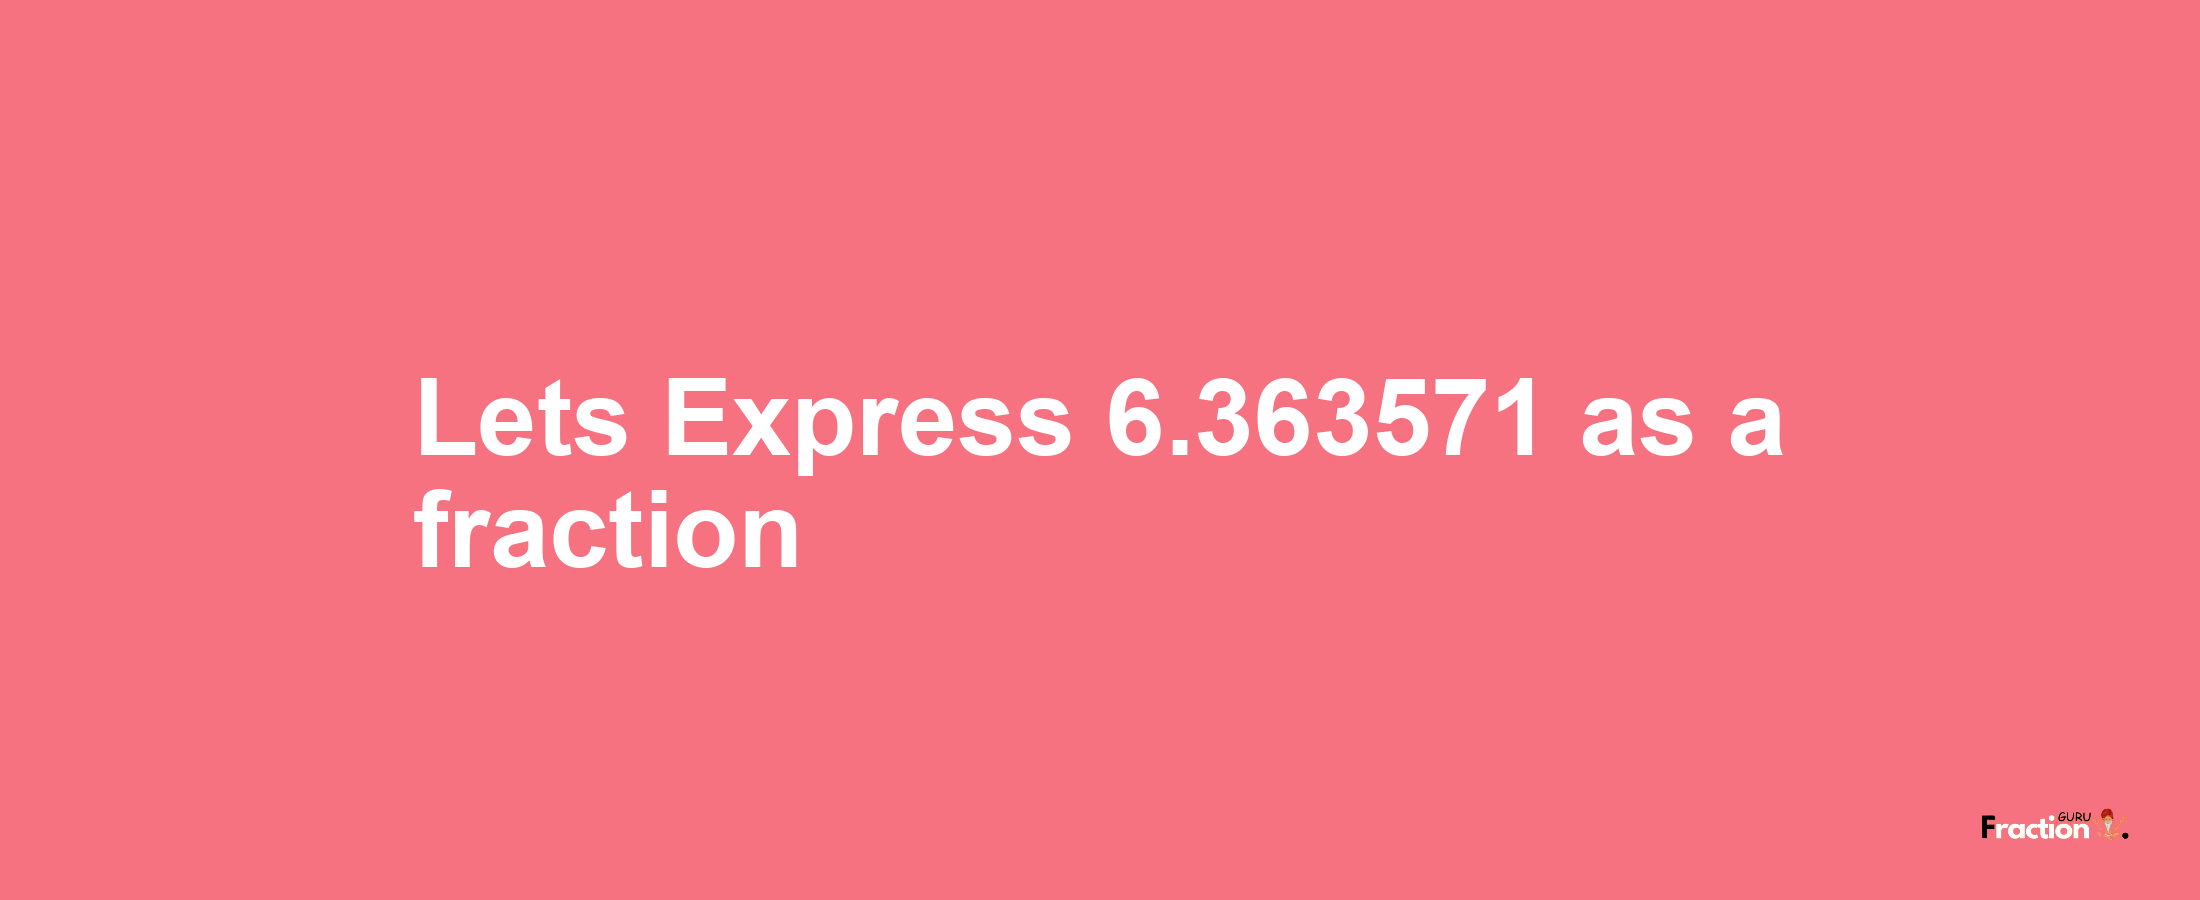 Lets Express 6.363571 as afraction